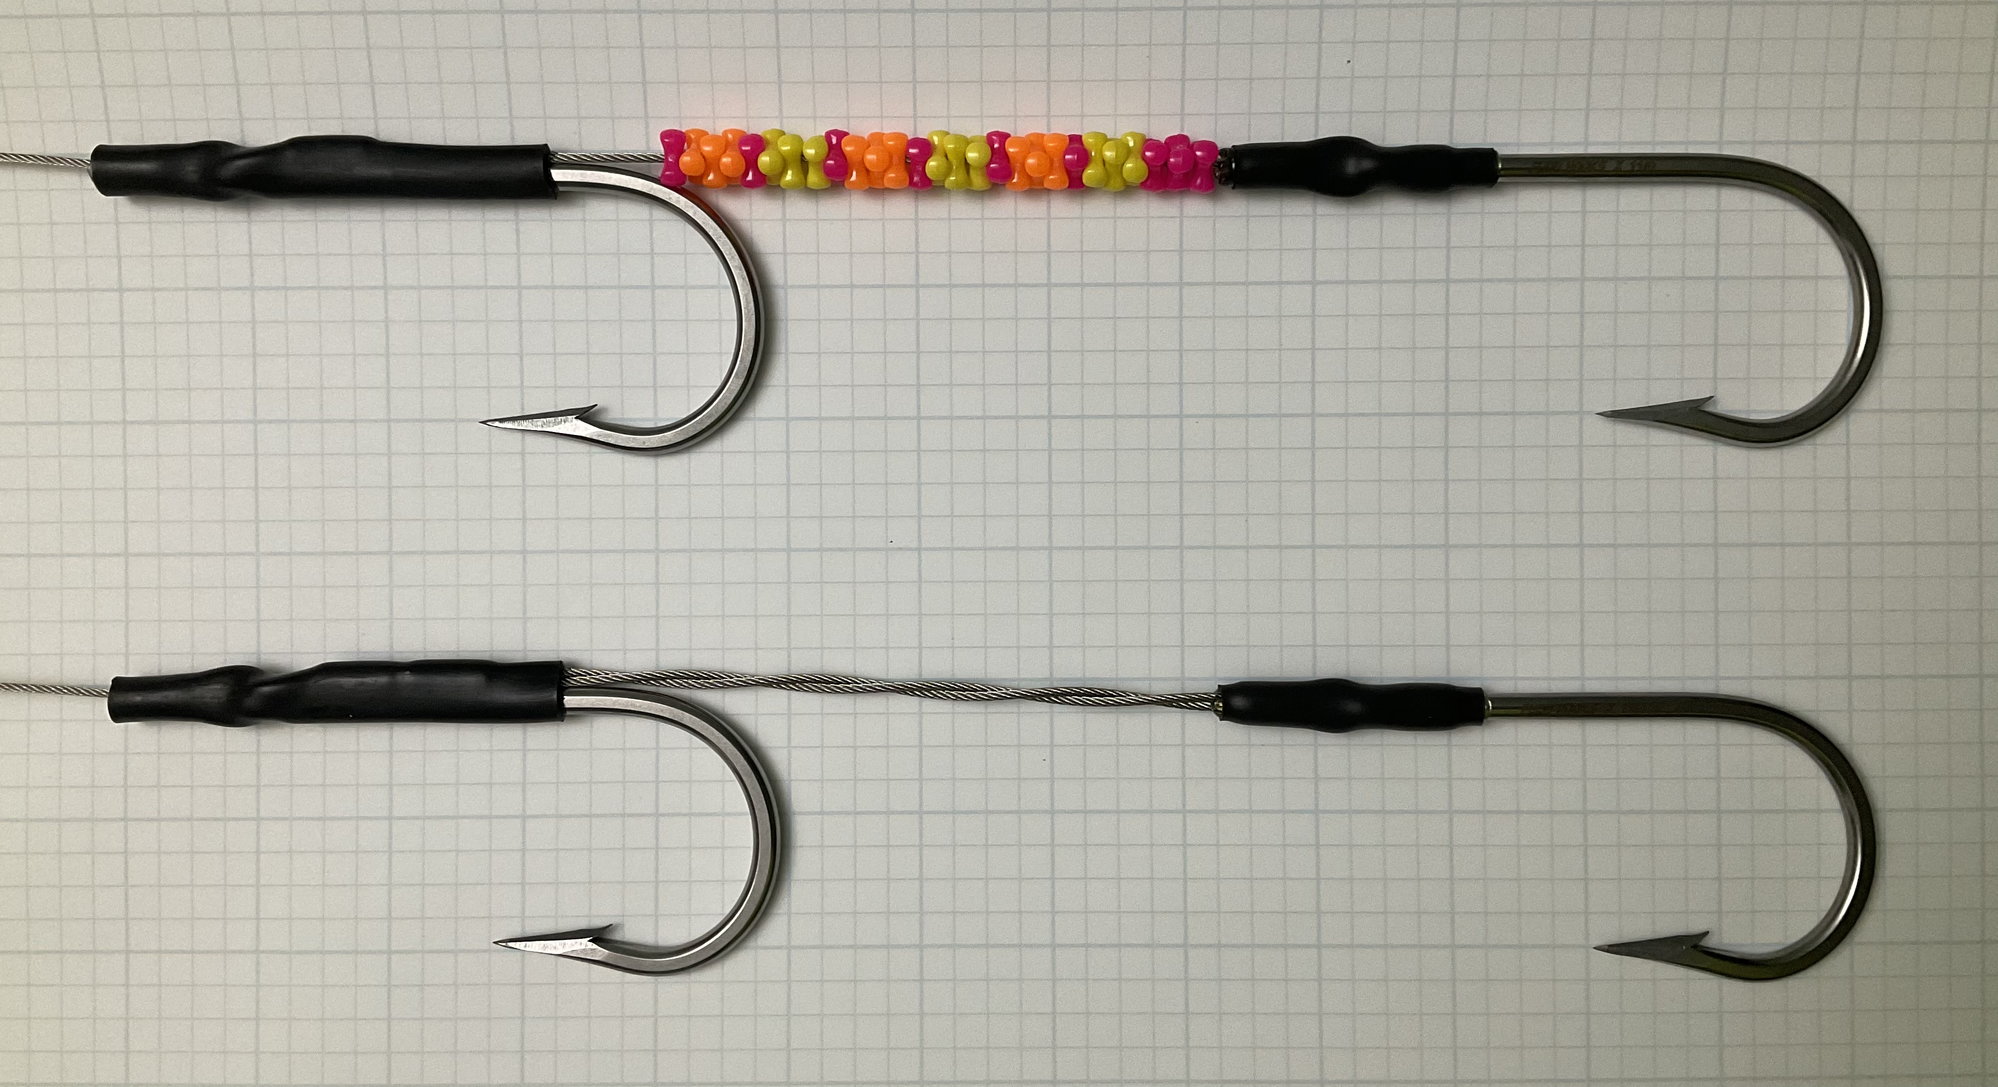 Rigging Marlin Lures with Sta-Stuk Hooks